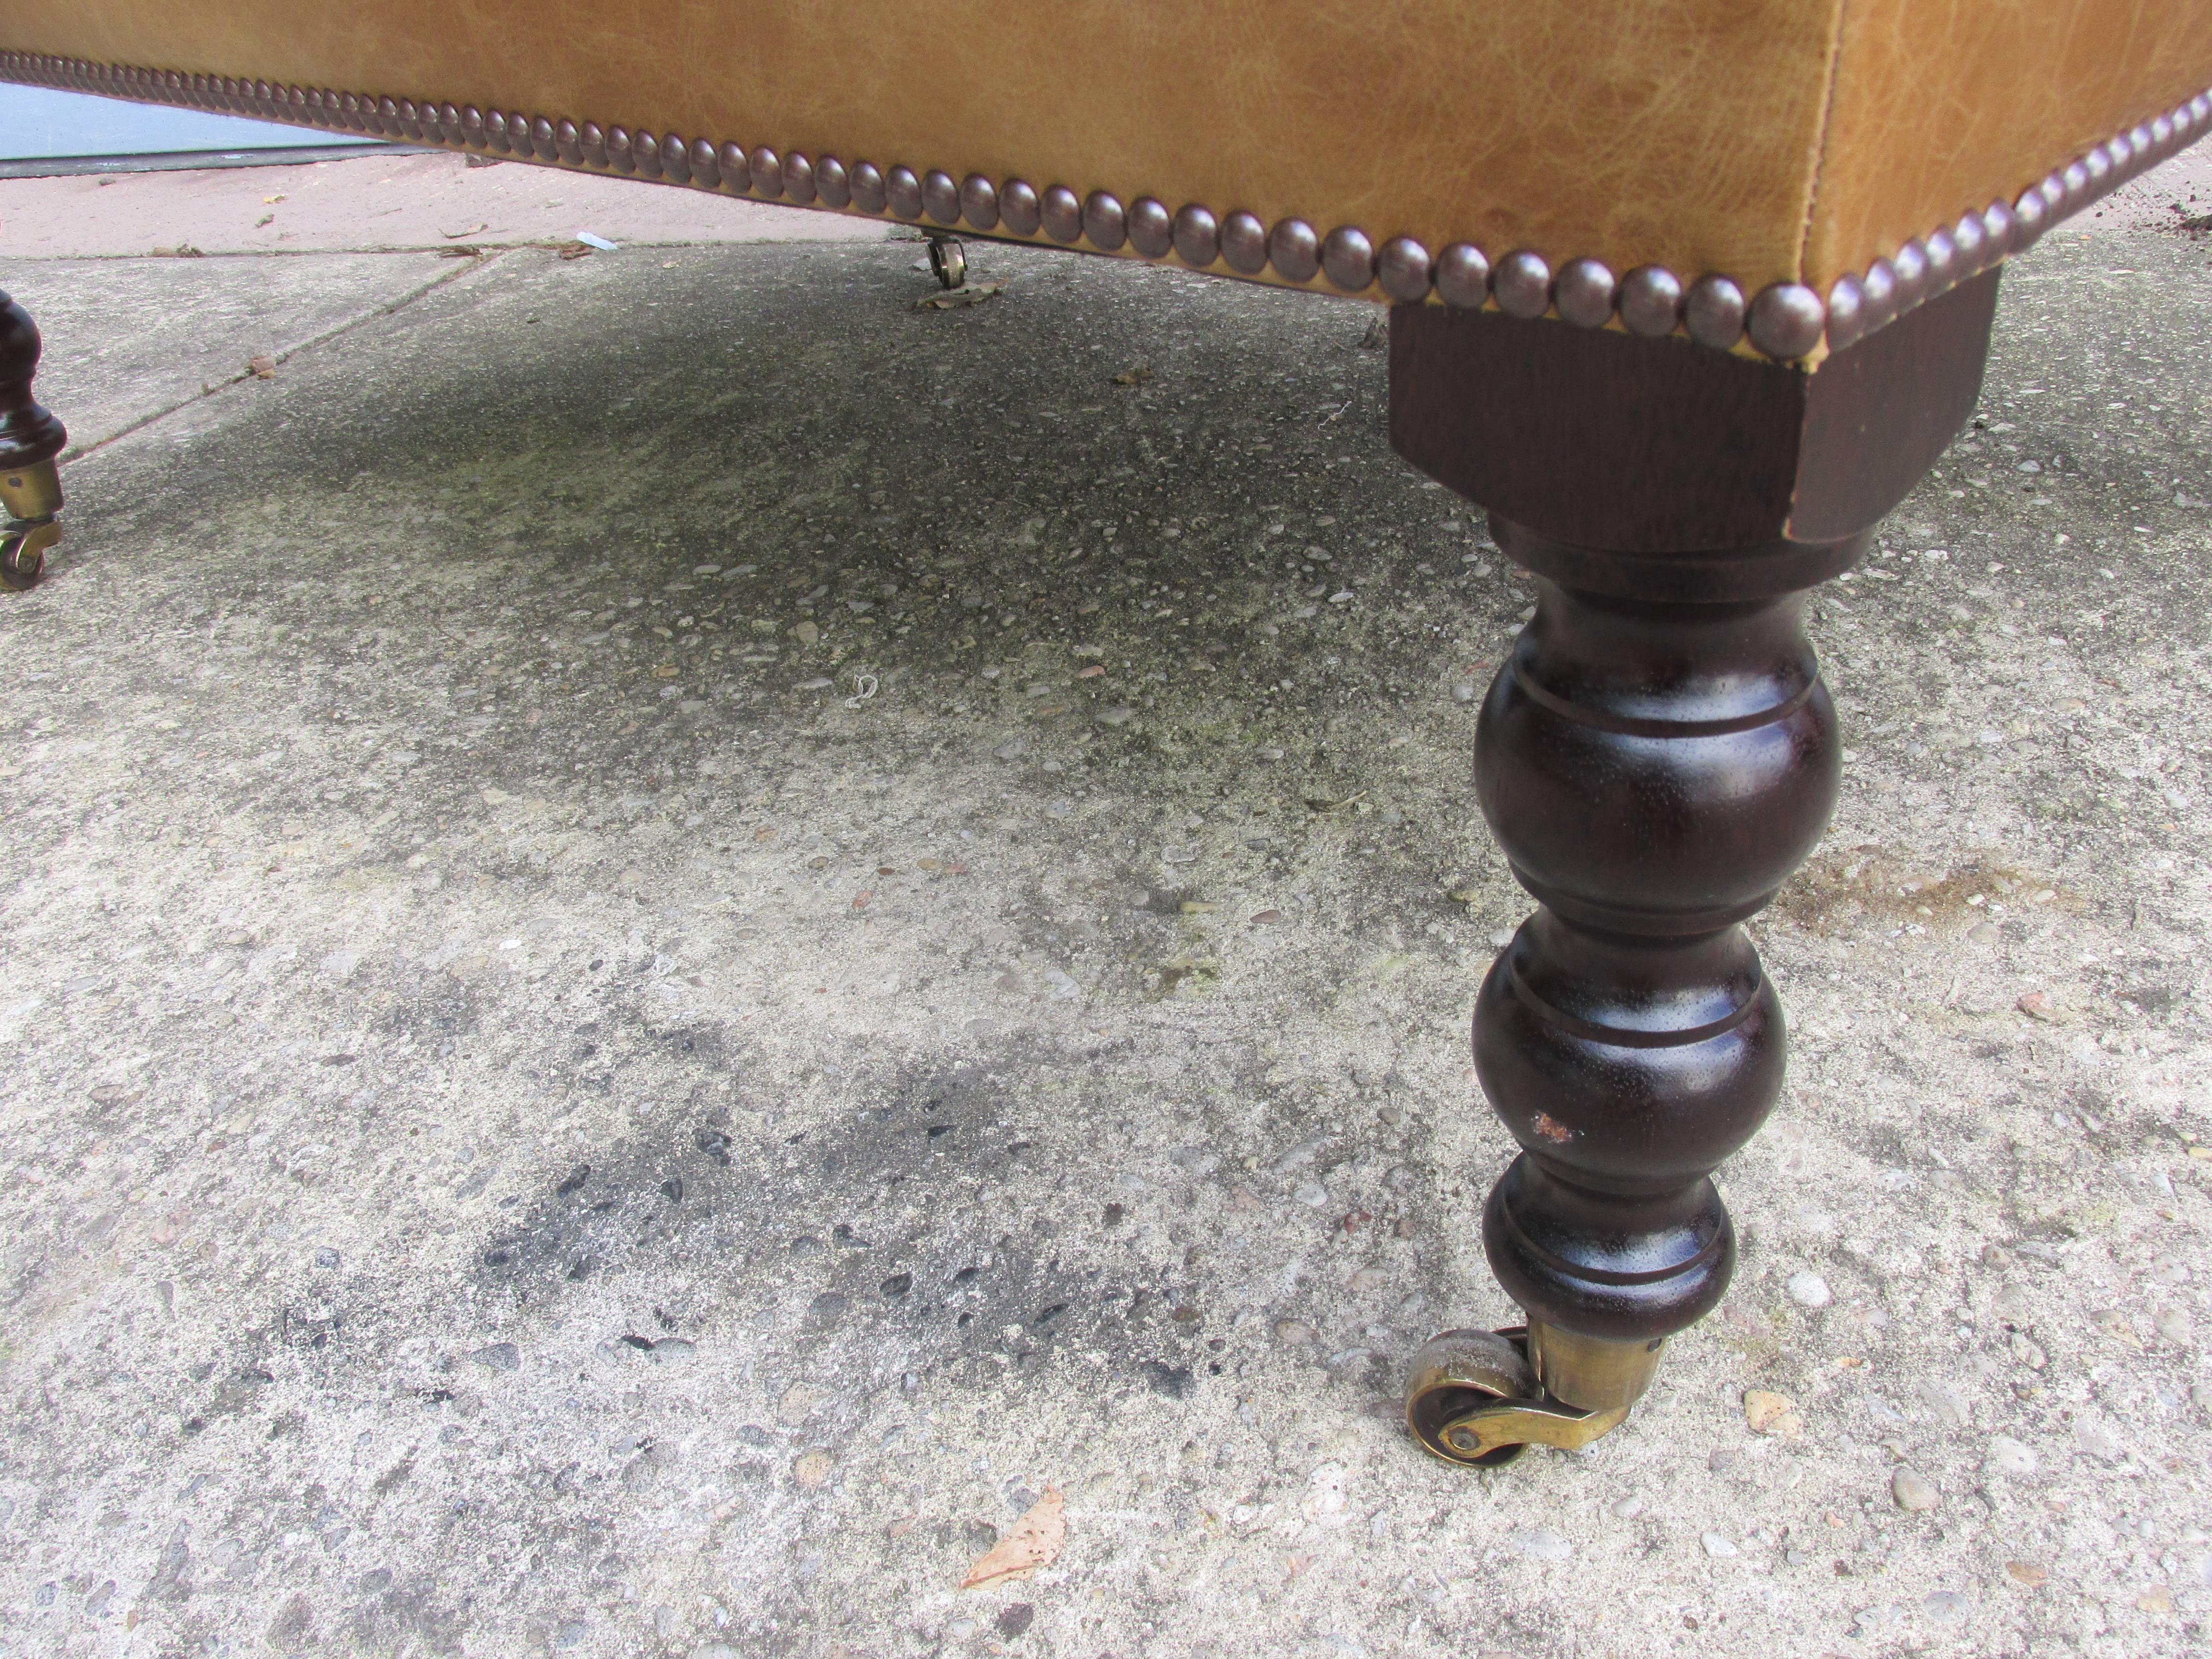 Rectangular leather Ottoman from the mid- 1990s. Nicely turned walnut legs with brass castors. Retains original labels. Pair of matched leather chairs available in a separate listing.